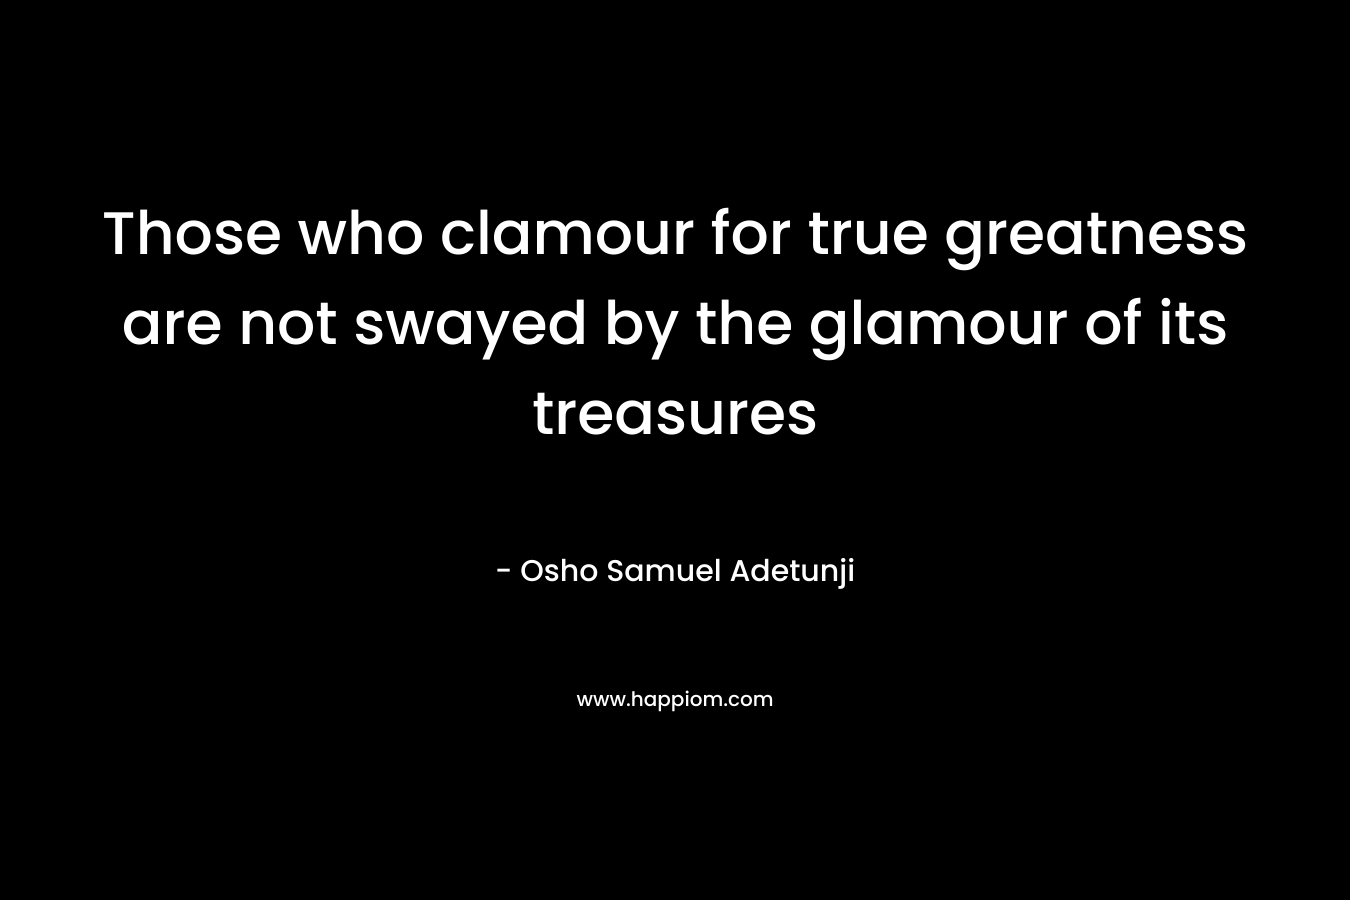 Those who clamour for true greatness are not swayed by the glamour of its treasures